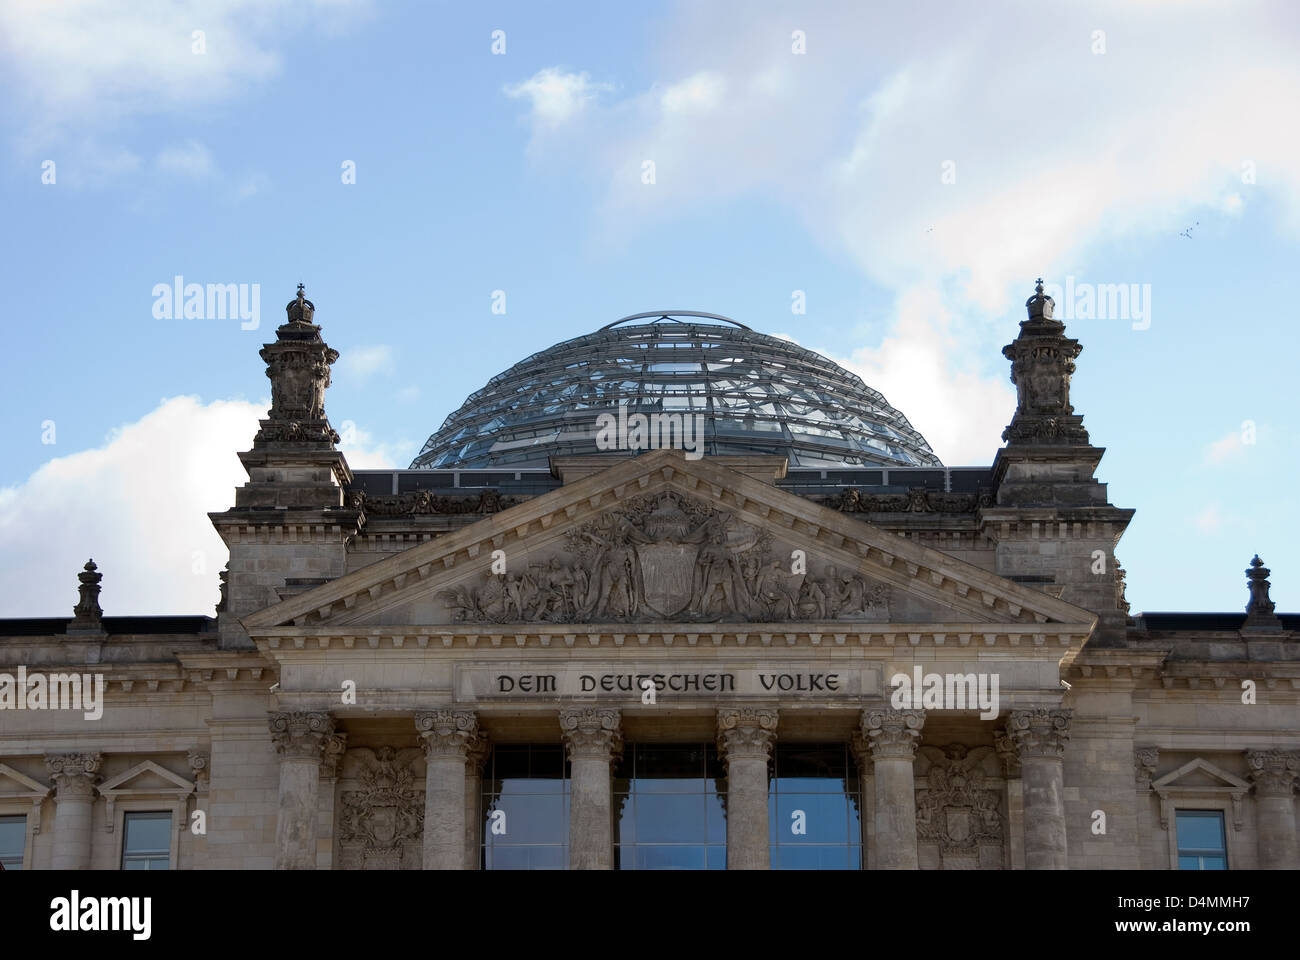 The Reichstag building in Berlin, Germany , It was opened in 1894 as a Parliament of the German Empire and work till today. Stock Photo